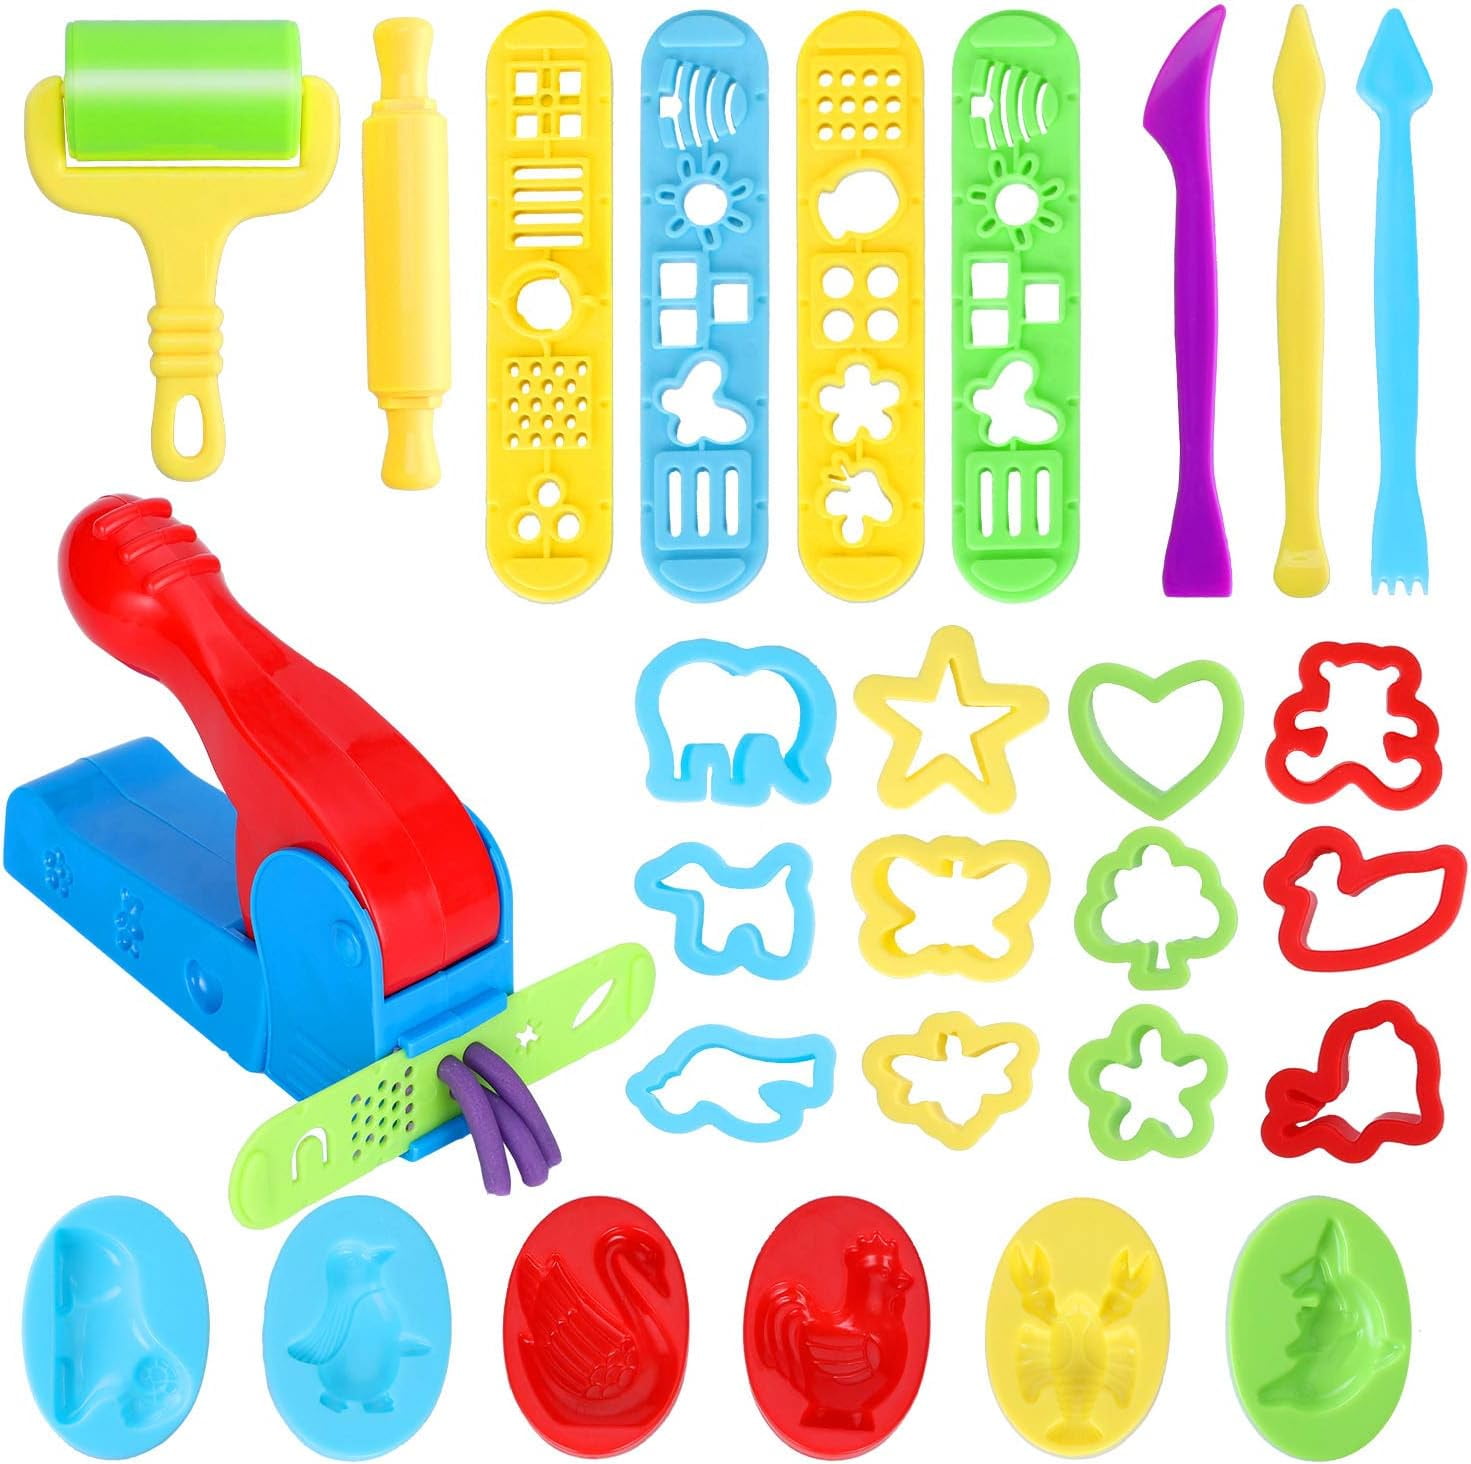 Dough Tools Kit for Kids 26pcs Clay Modelling Tools Play Set Plastic  Cutters for Play Dough Plasticine Accessories with Different Shapes for DIY  Crafts Working